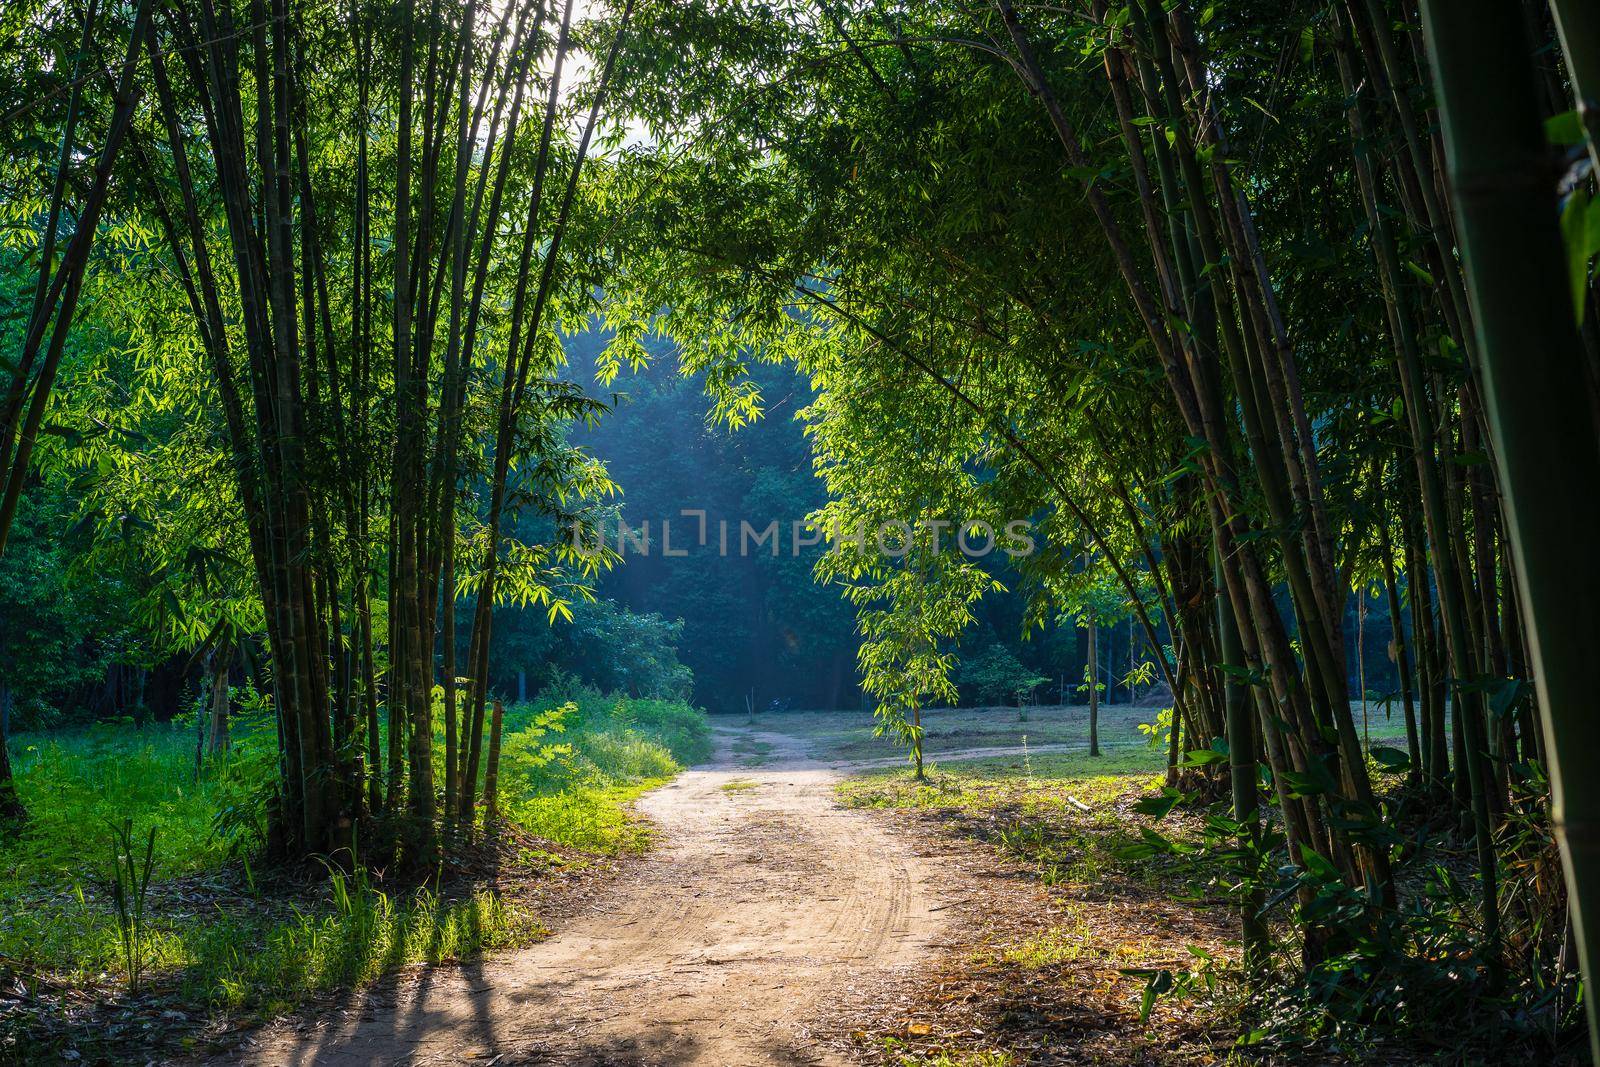 Walkway Lane Path with bamboo trees in forest